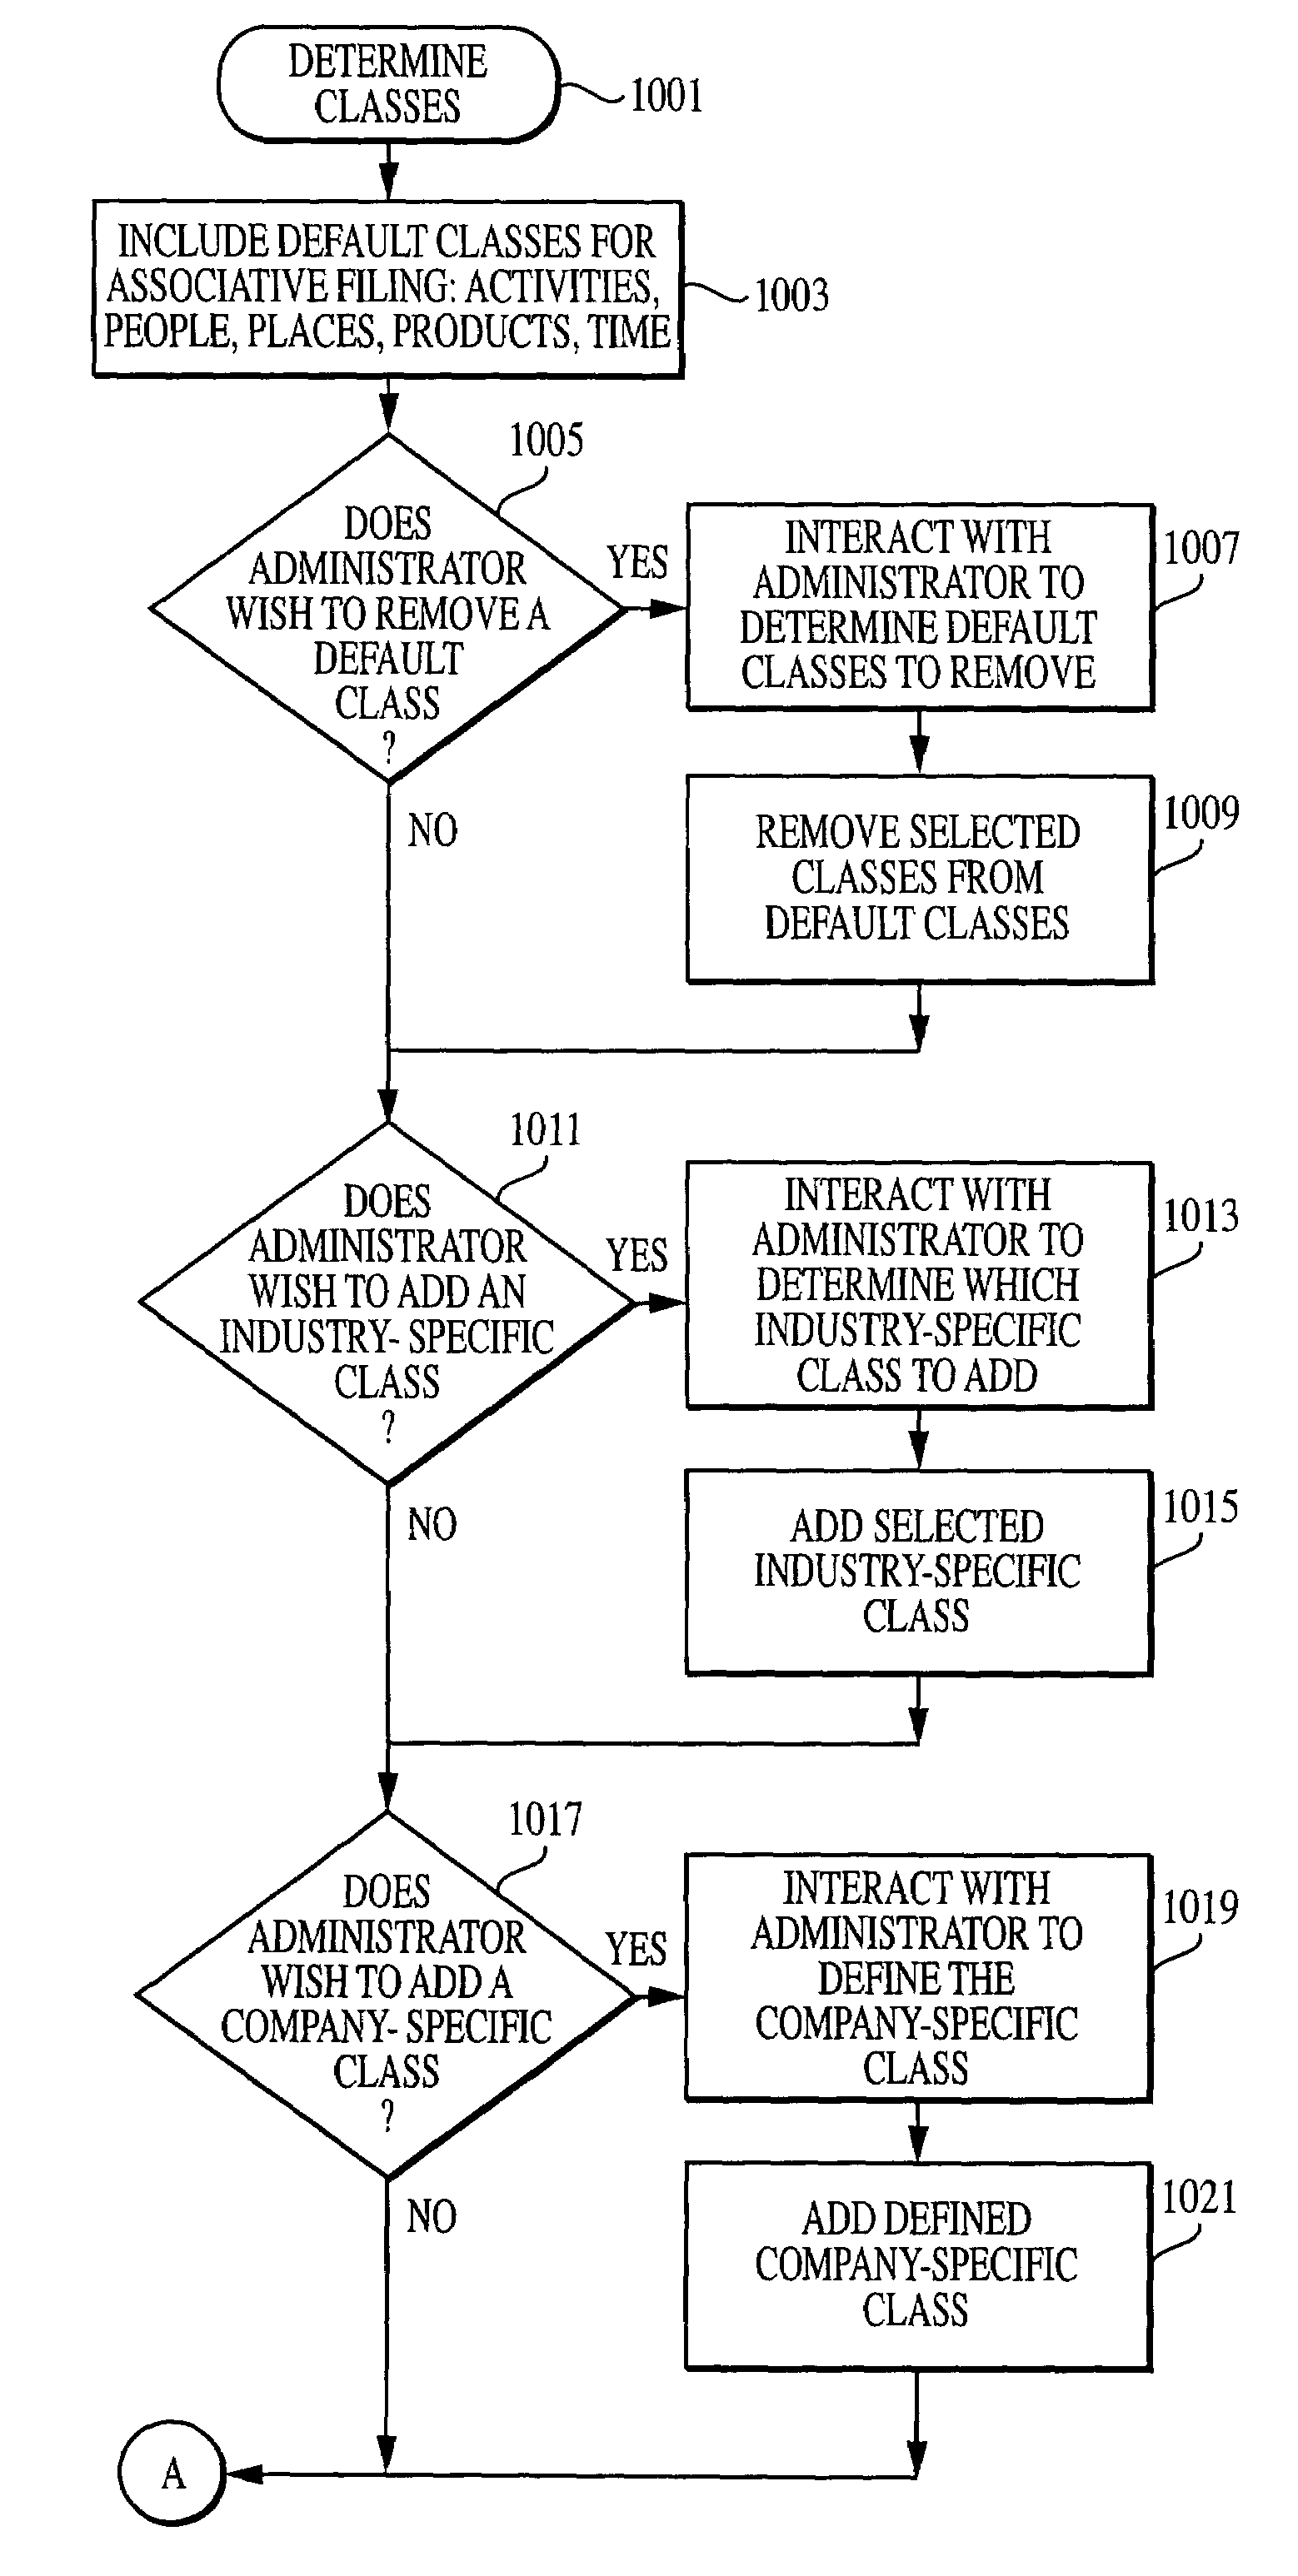 Computer assisted and/or implemented method and system for layered access and/or supervisory control of projects and items incorporating electronic information